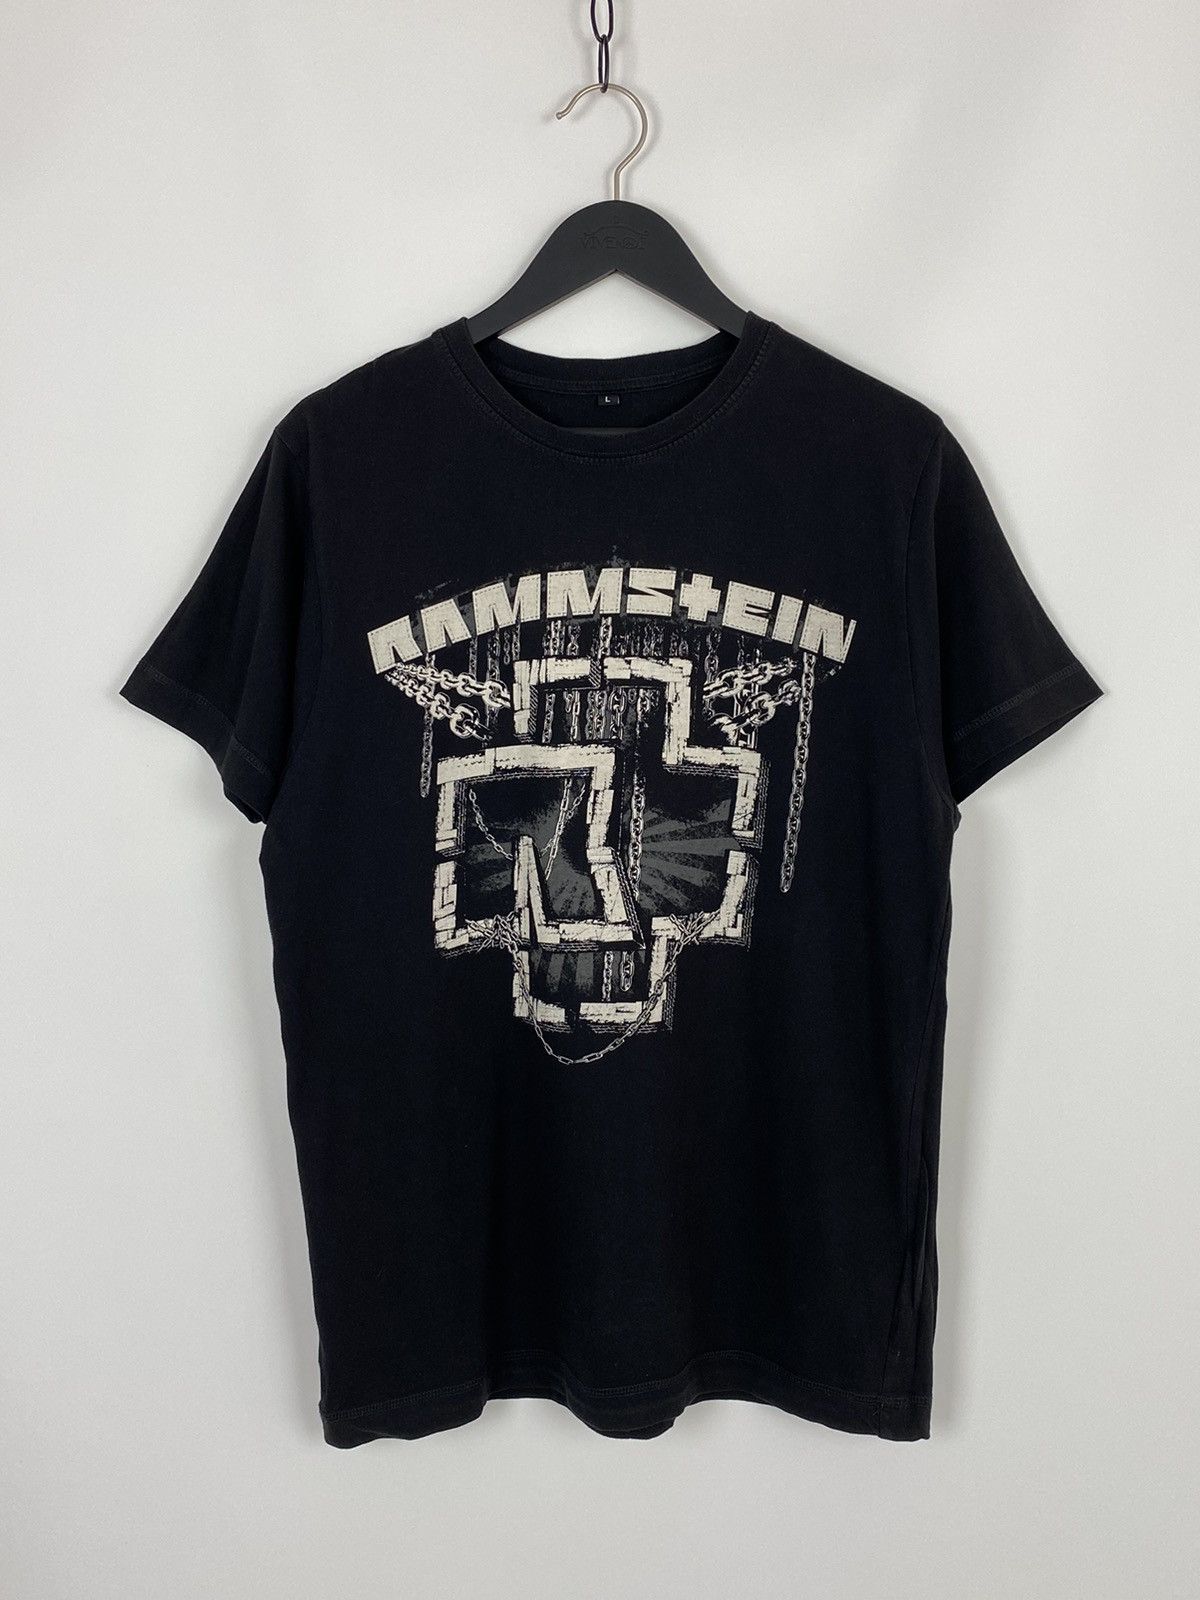 Pre-owned Band Tees X Rock T Shirt Rammstein Logo T-shirt In Black